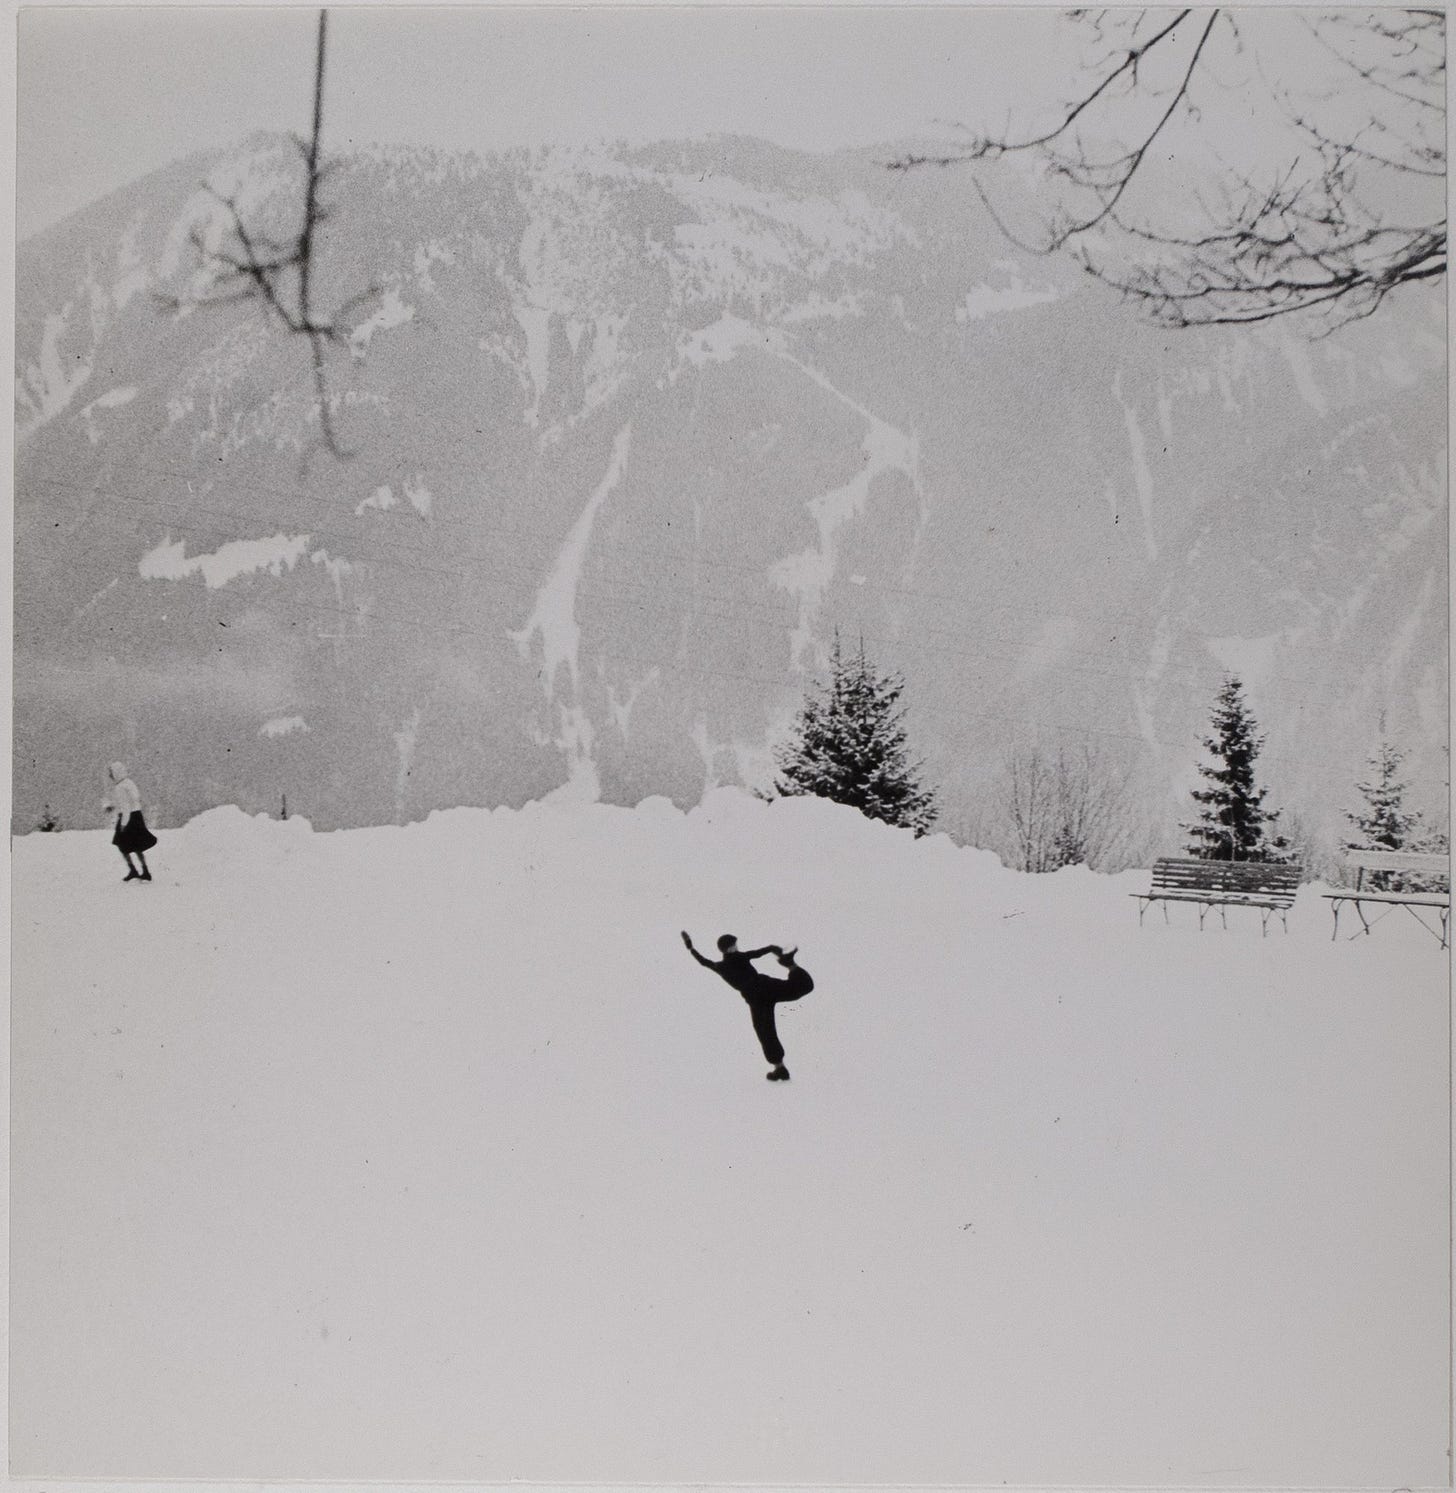 Two skaters on an outdoor rink in front of mountains in Arosa, Switzerland, in 1946